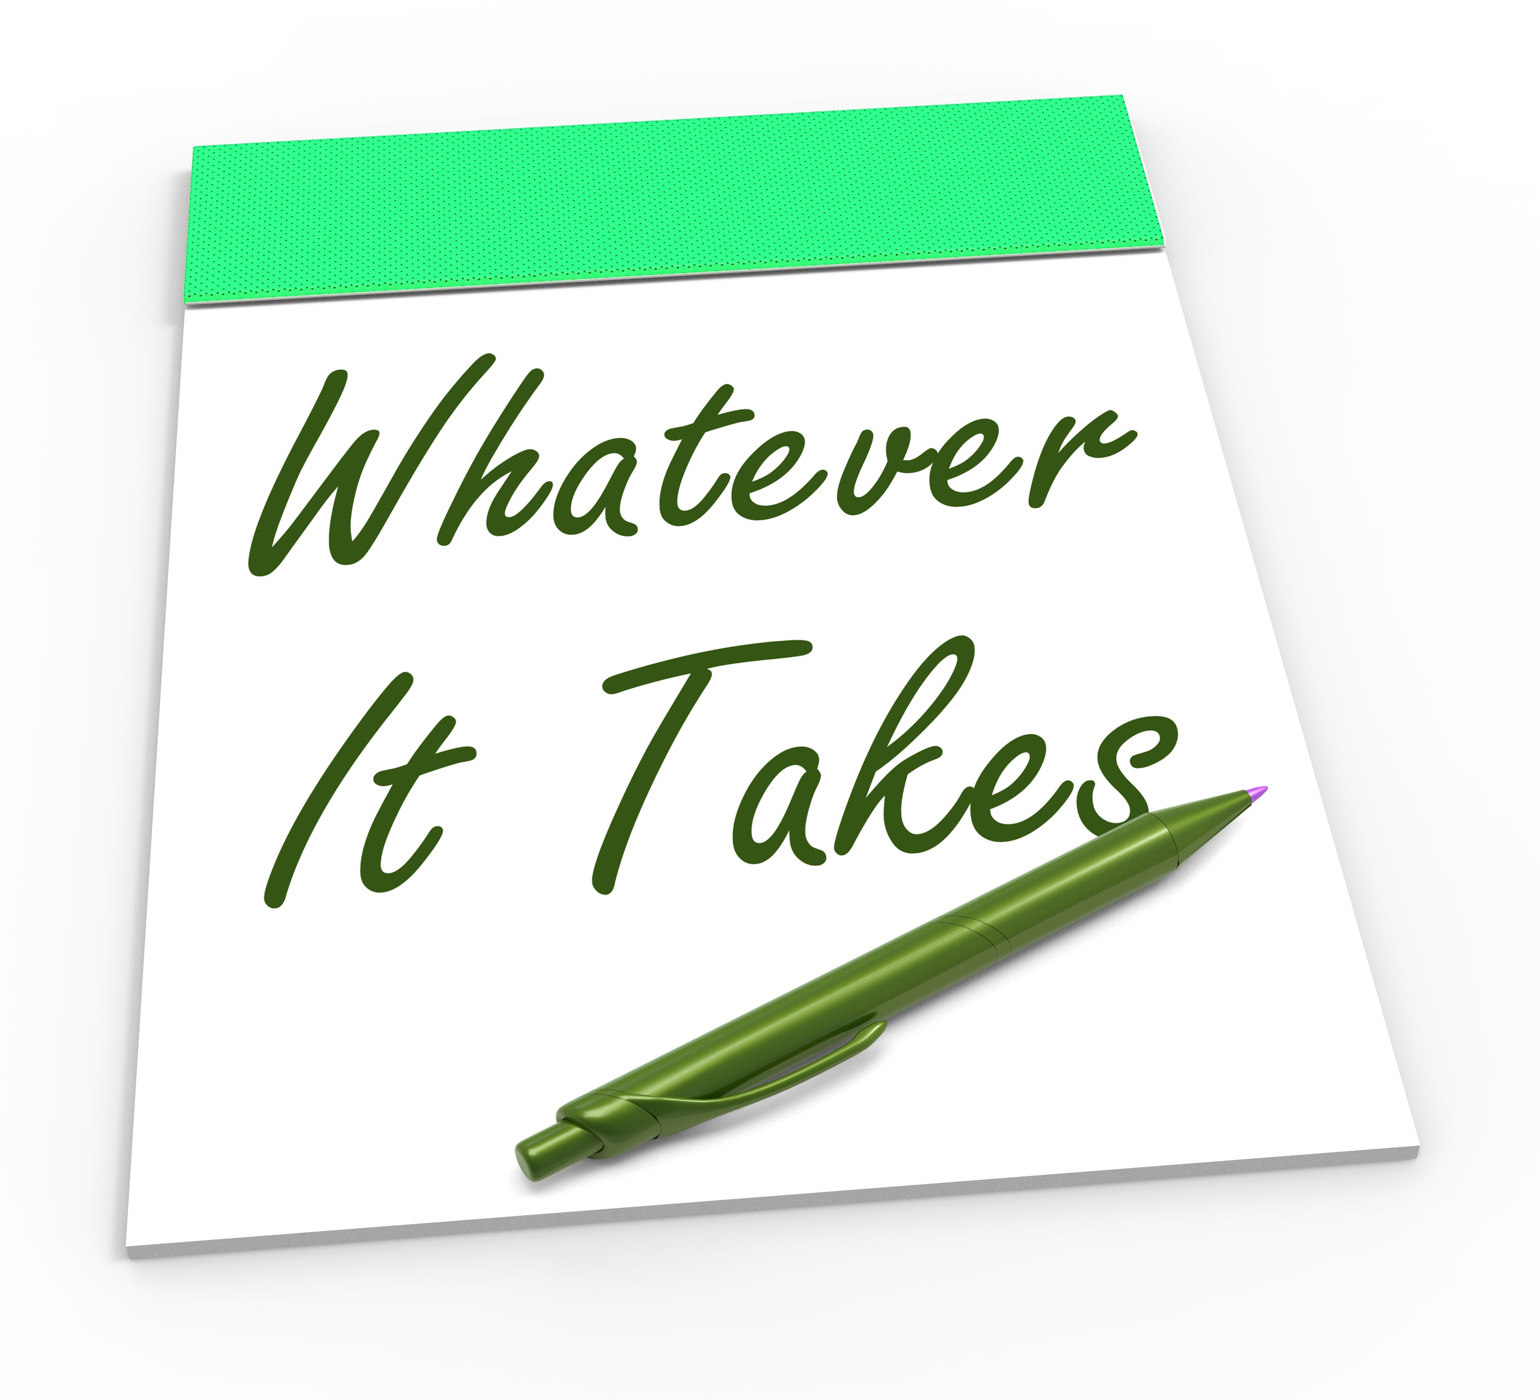 Whatever it takes notepad shows determination and dedication photo